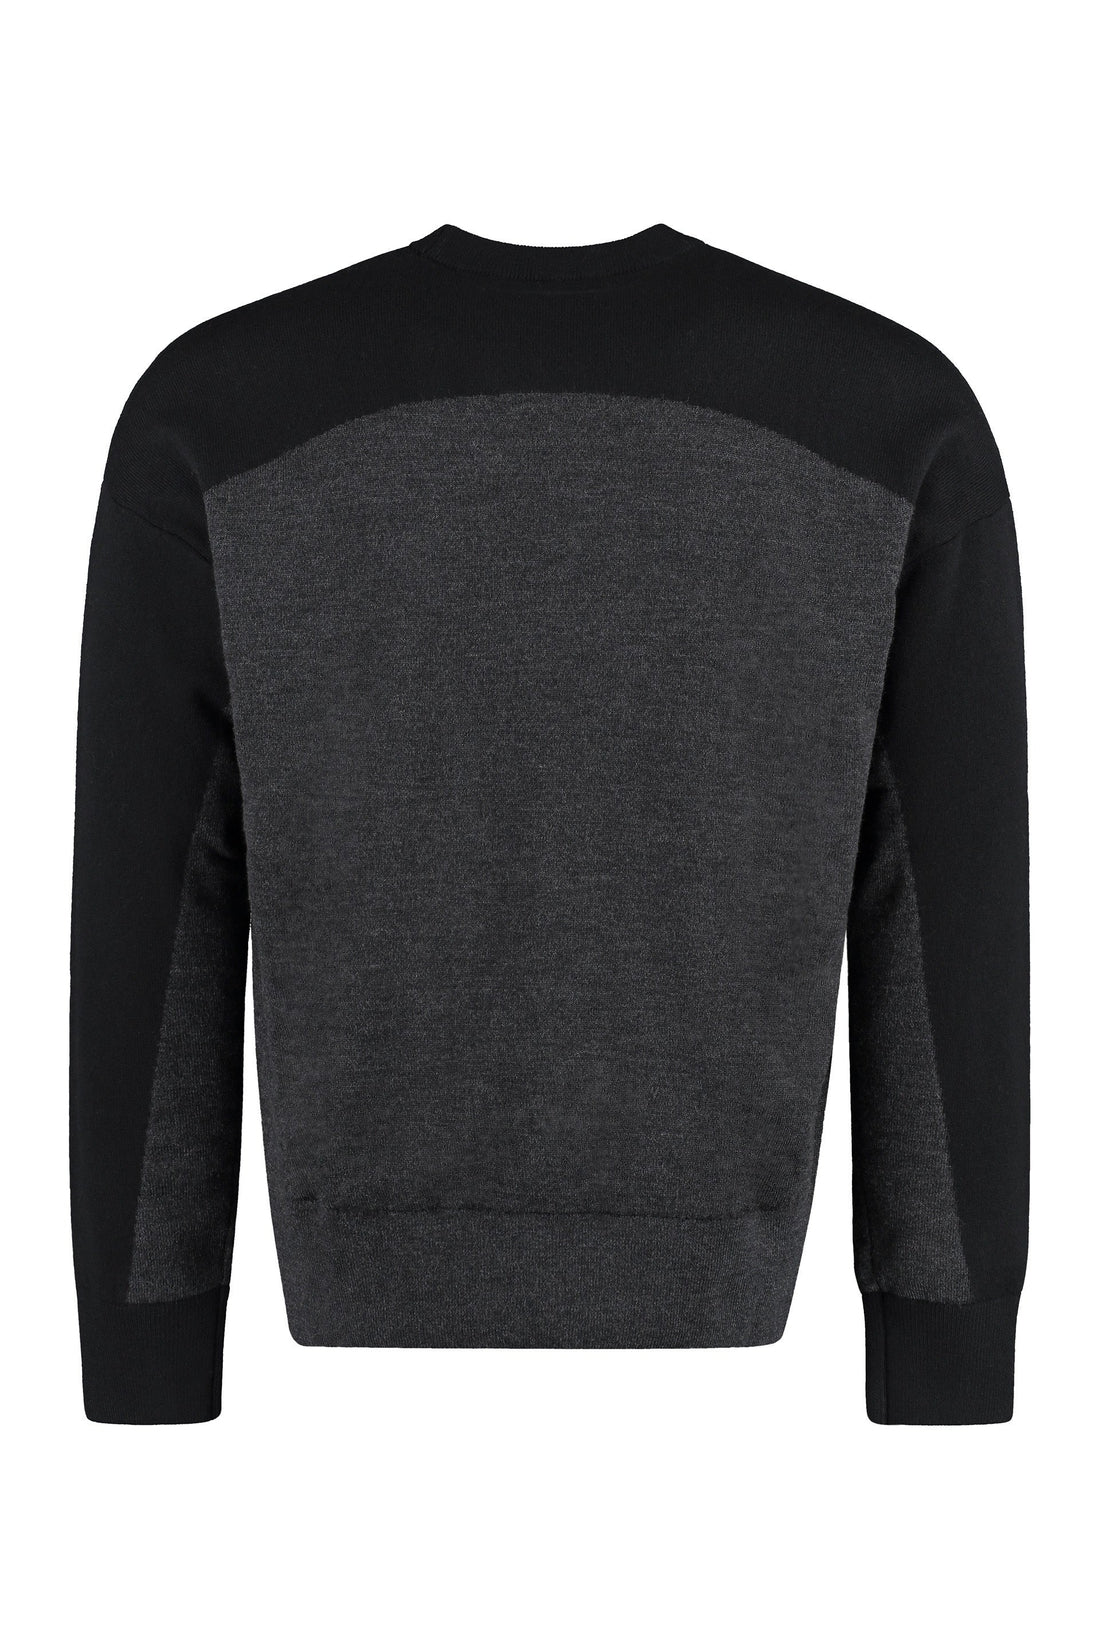 Piralo-OUTLET-SALE-Long sleeve crew-neck sweater-ARCHIVIST